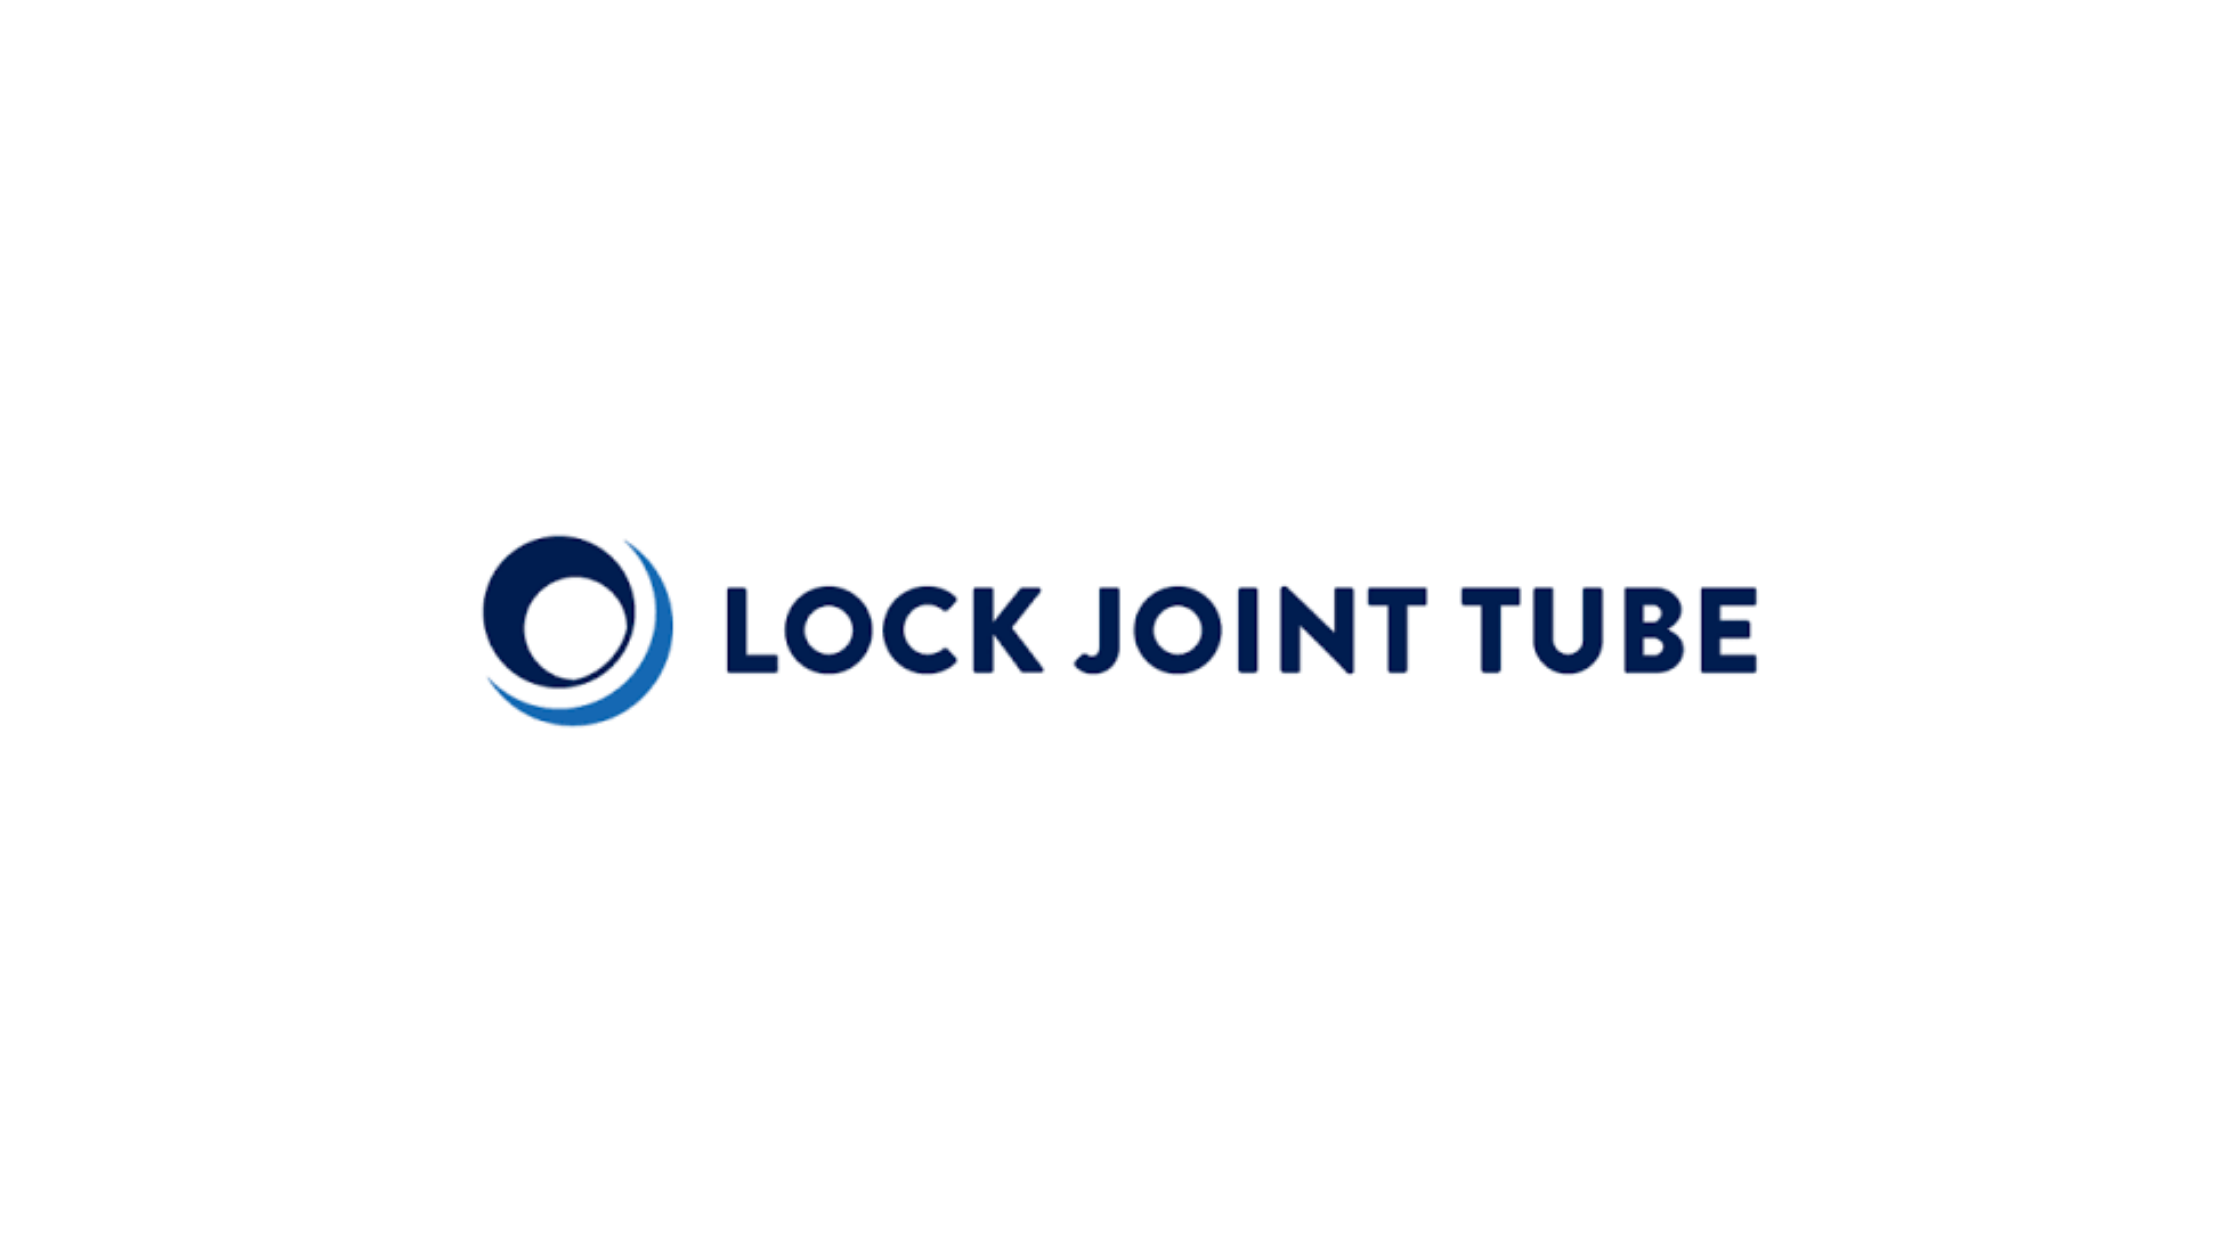 Lock Joint Tube Improves Operations with enFocus Support